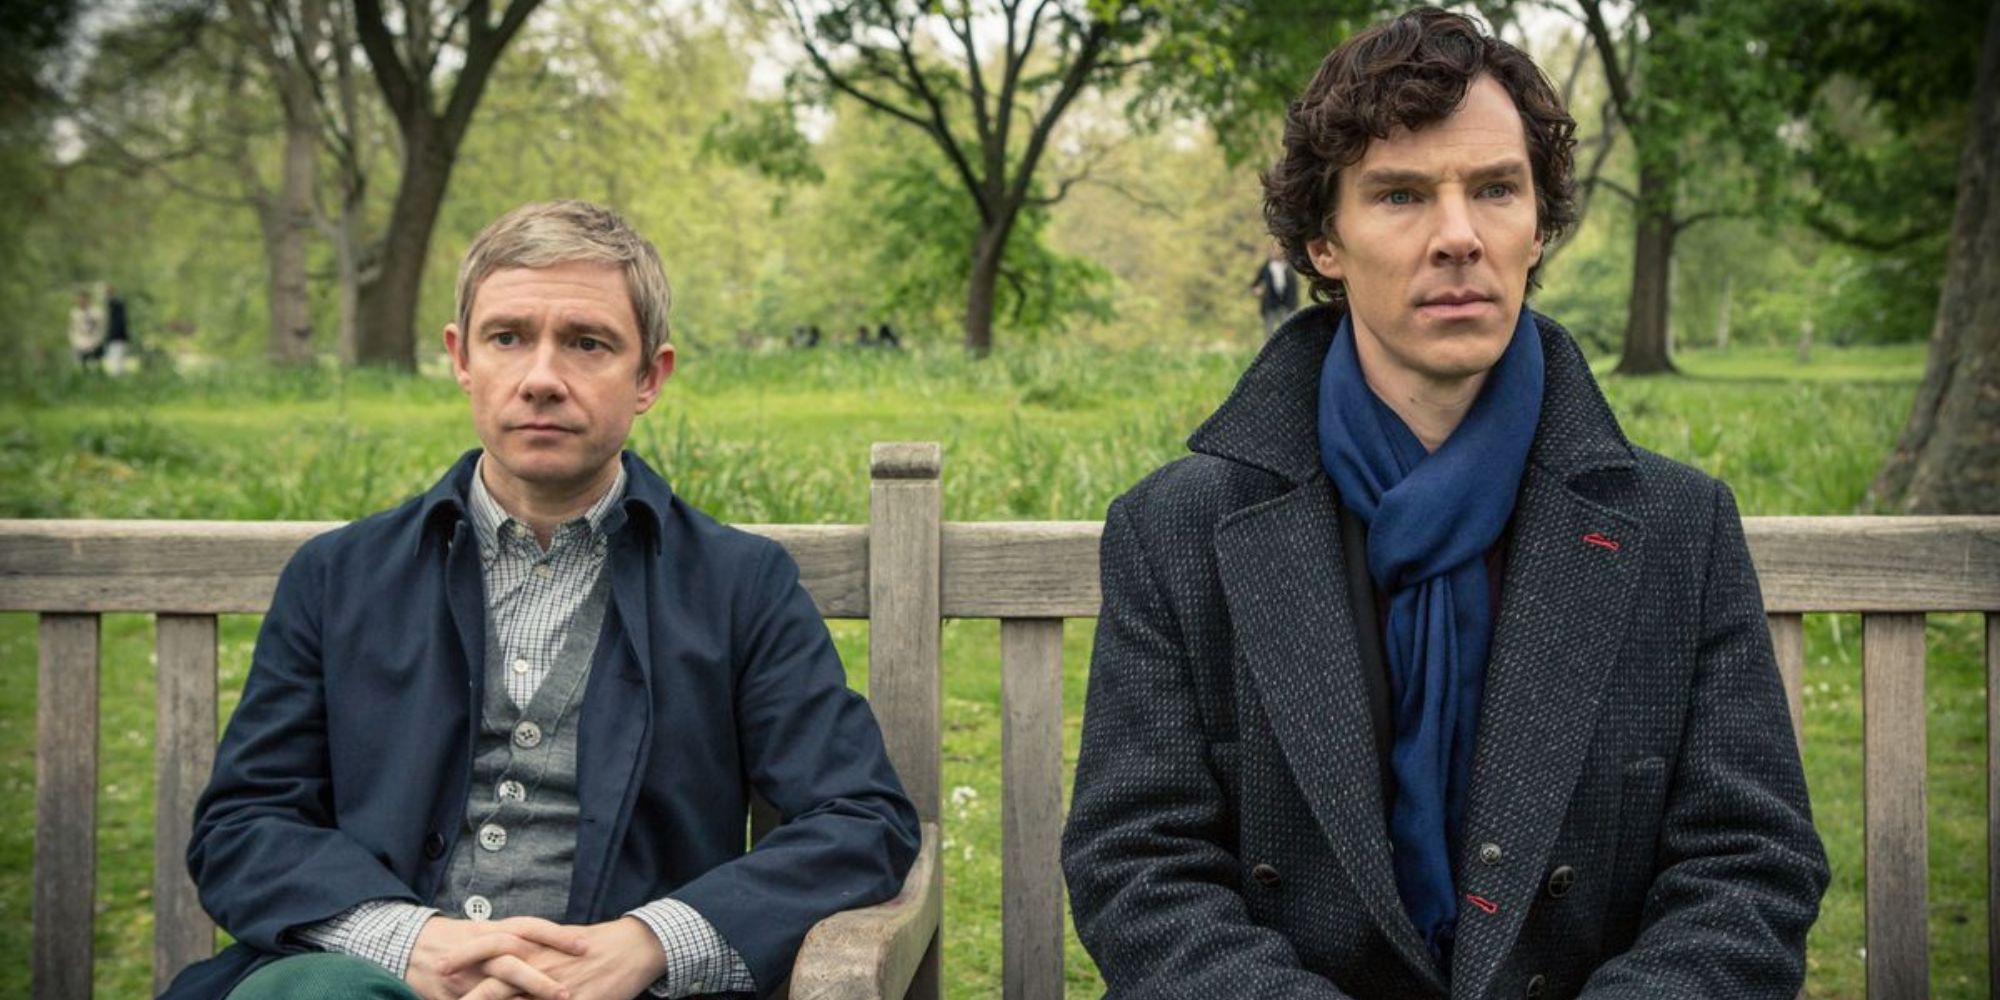 Dr. John Watson and Sherlock Holmes from Sherlock sitting on a bench together